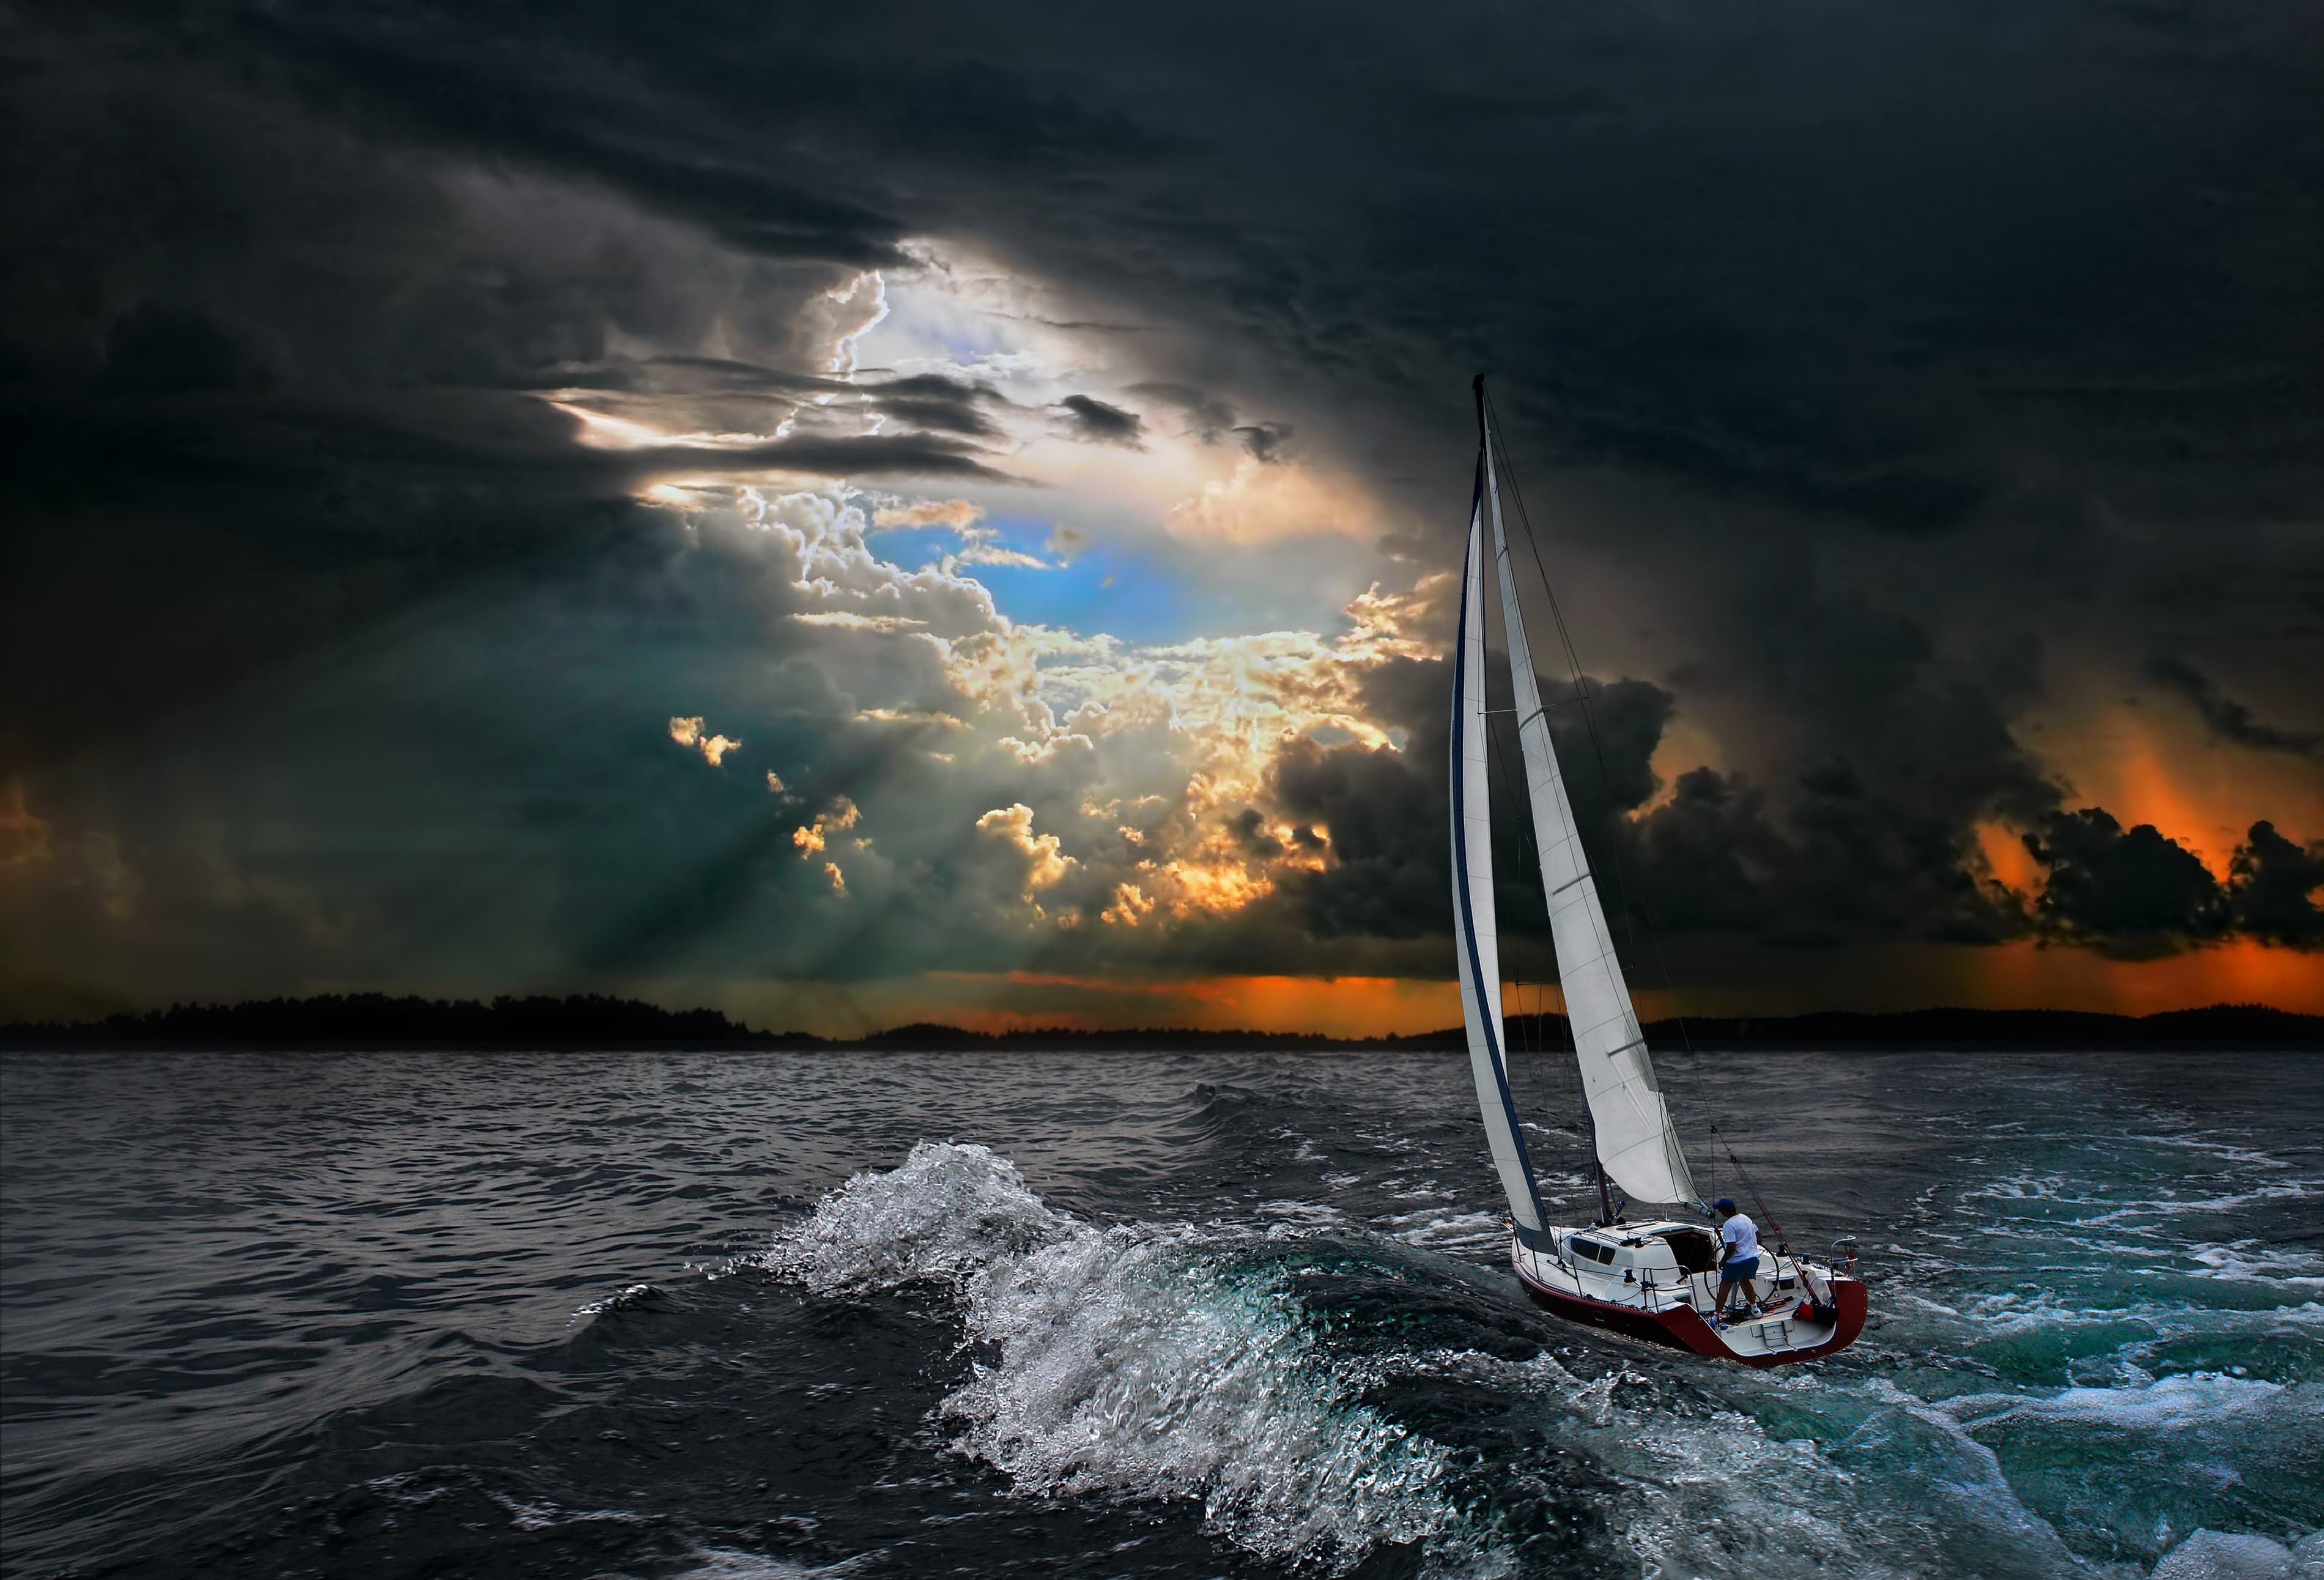 Global travel: Yacht sailing out of storm towards ray of sunshine